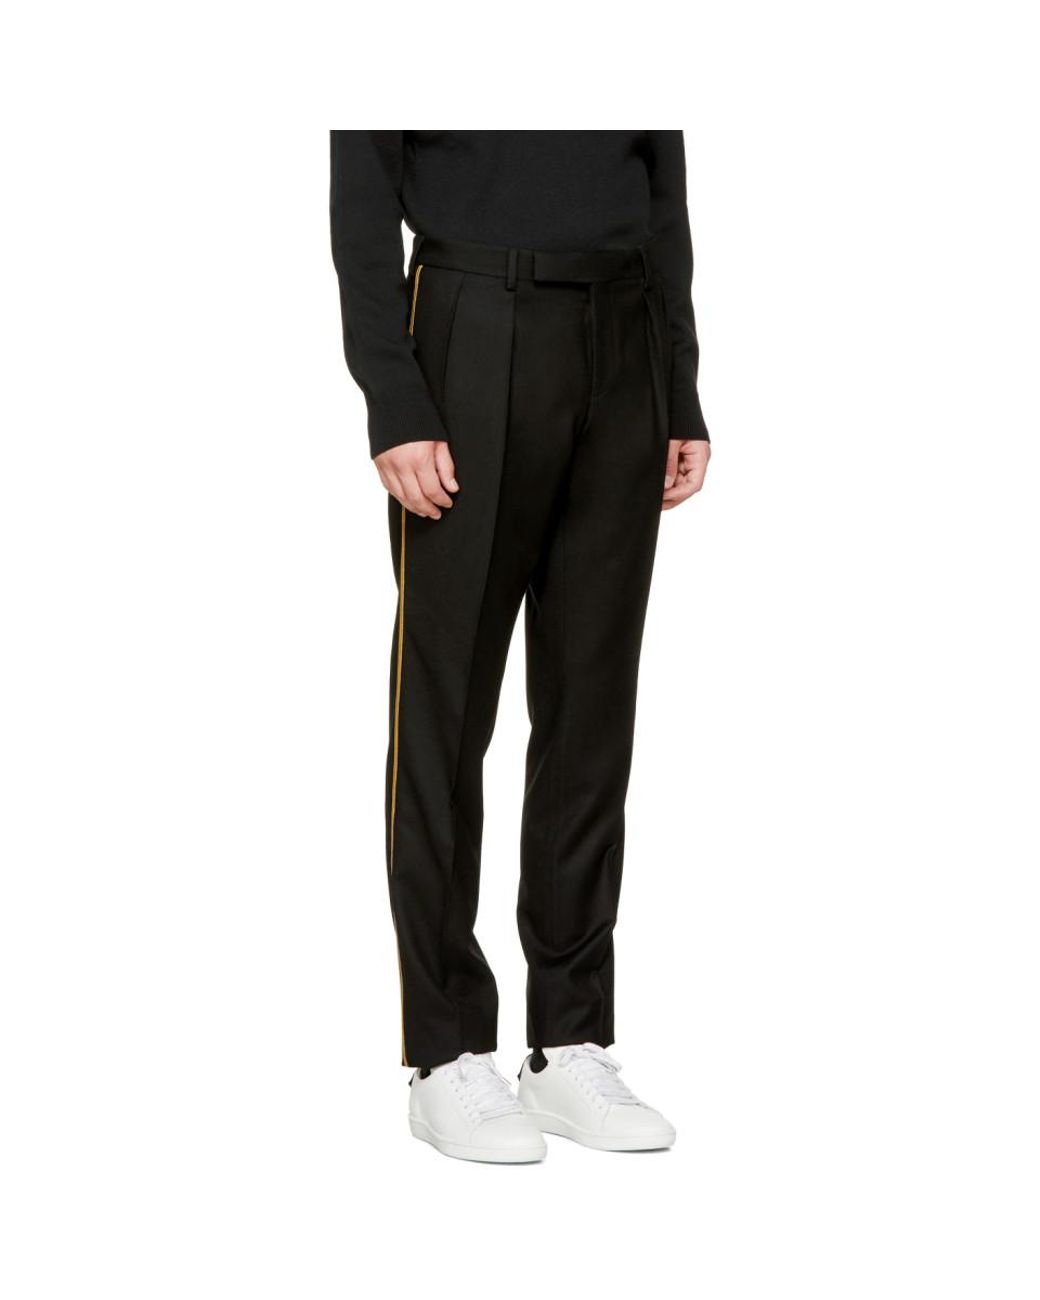 Twisted Tailor suit pants in black and gold stripe  ASOS